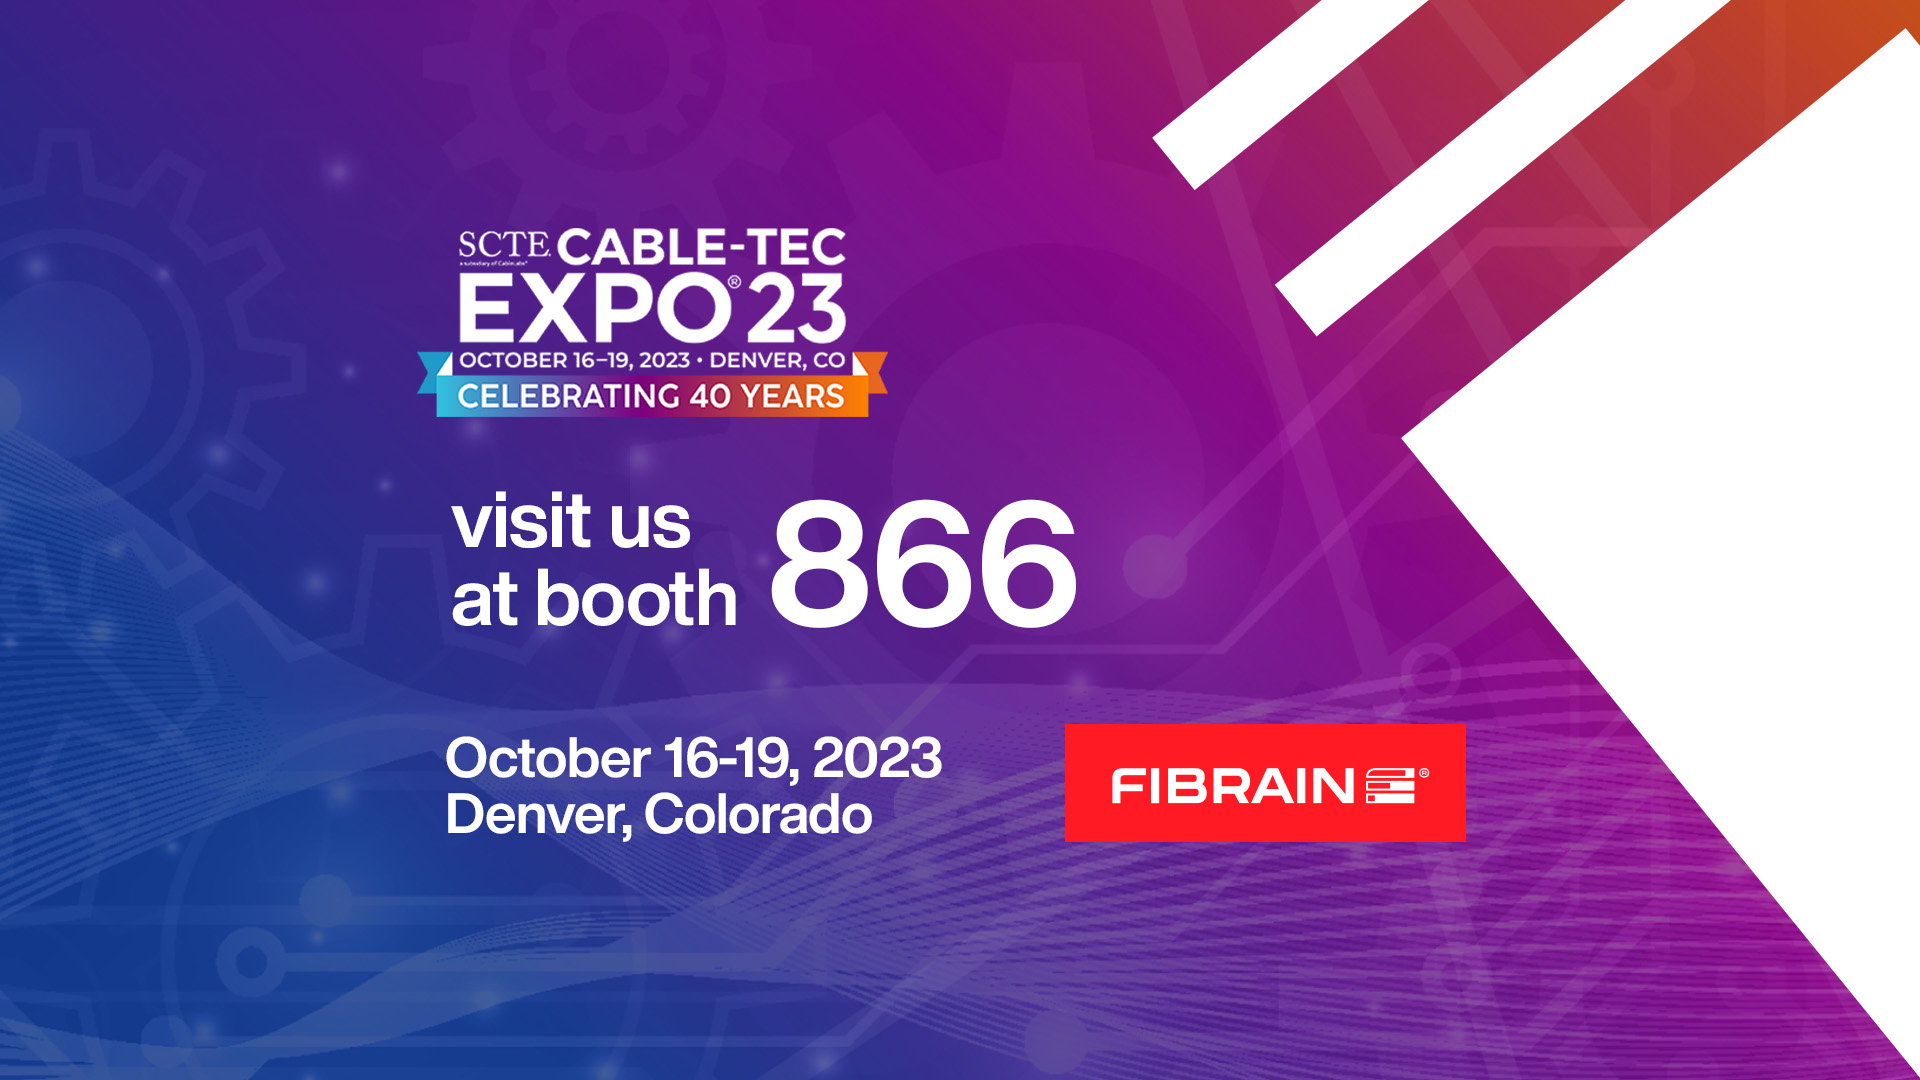 Let’s meet at SCTE-CABLE-TEC EXPO 2023 in Denver in the USA!